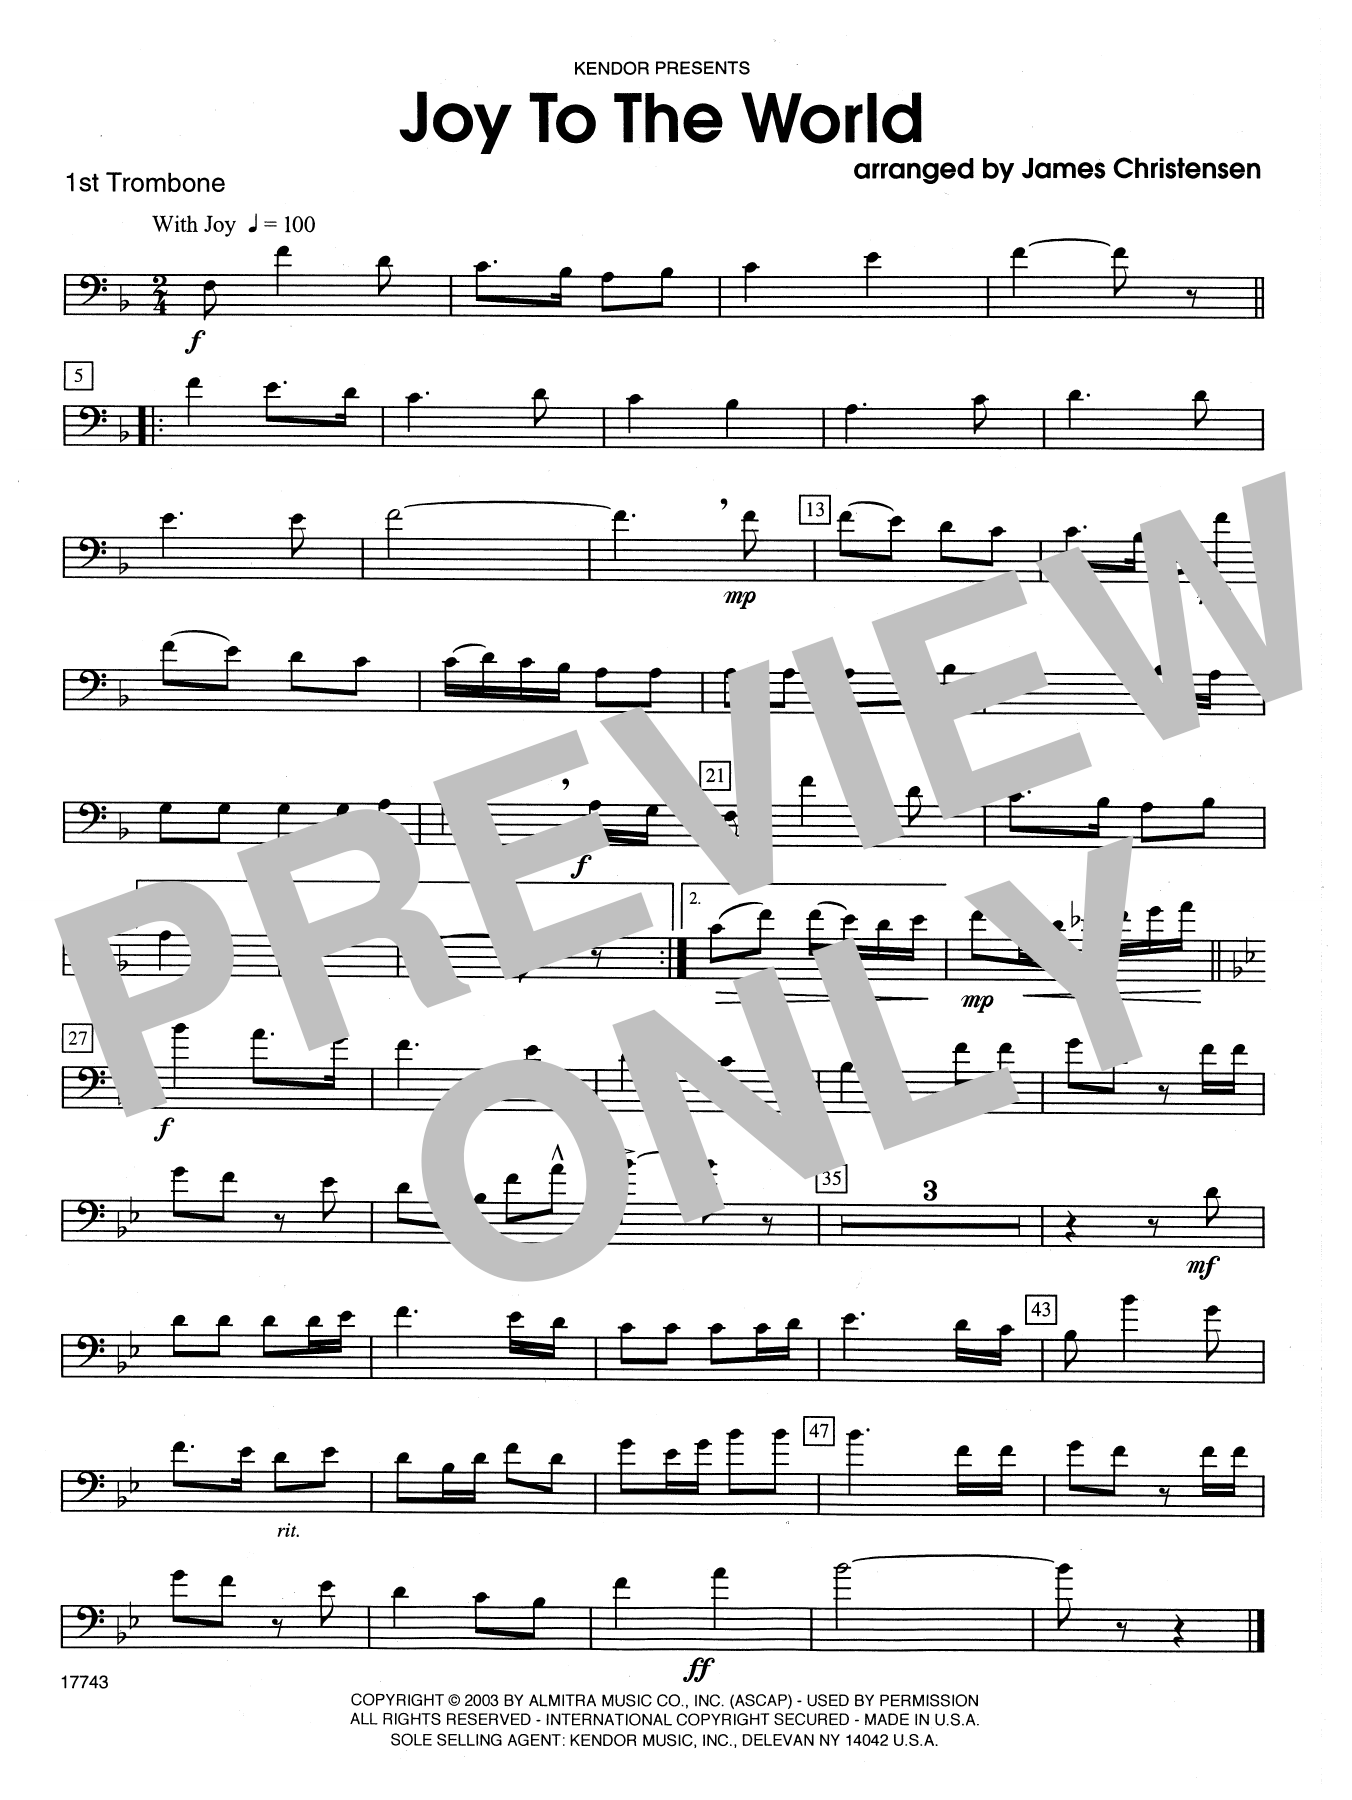 James Christensen Joy to the World - 1st Trombone sheet music notes and chords. Download Printable PDF.